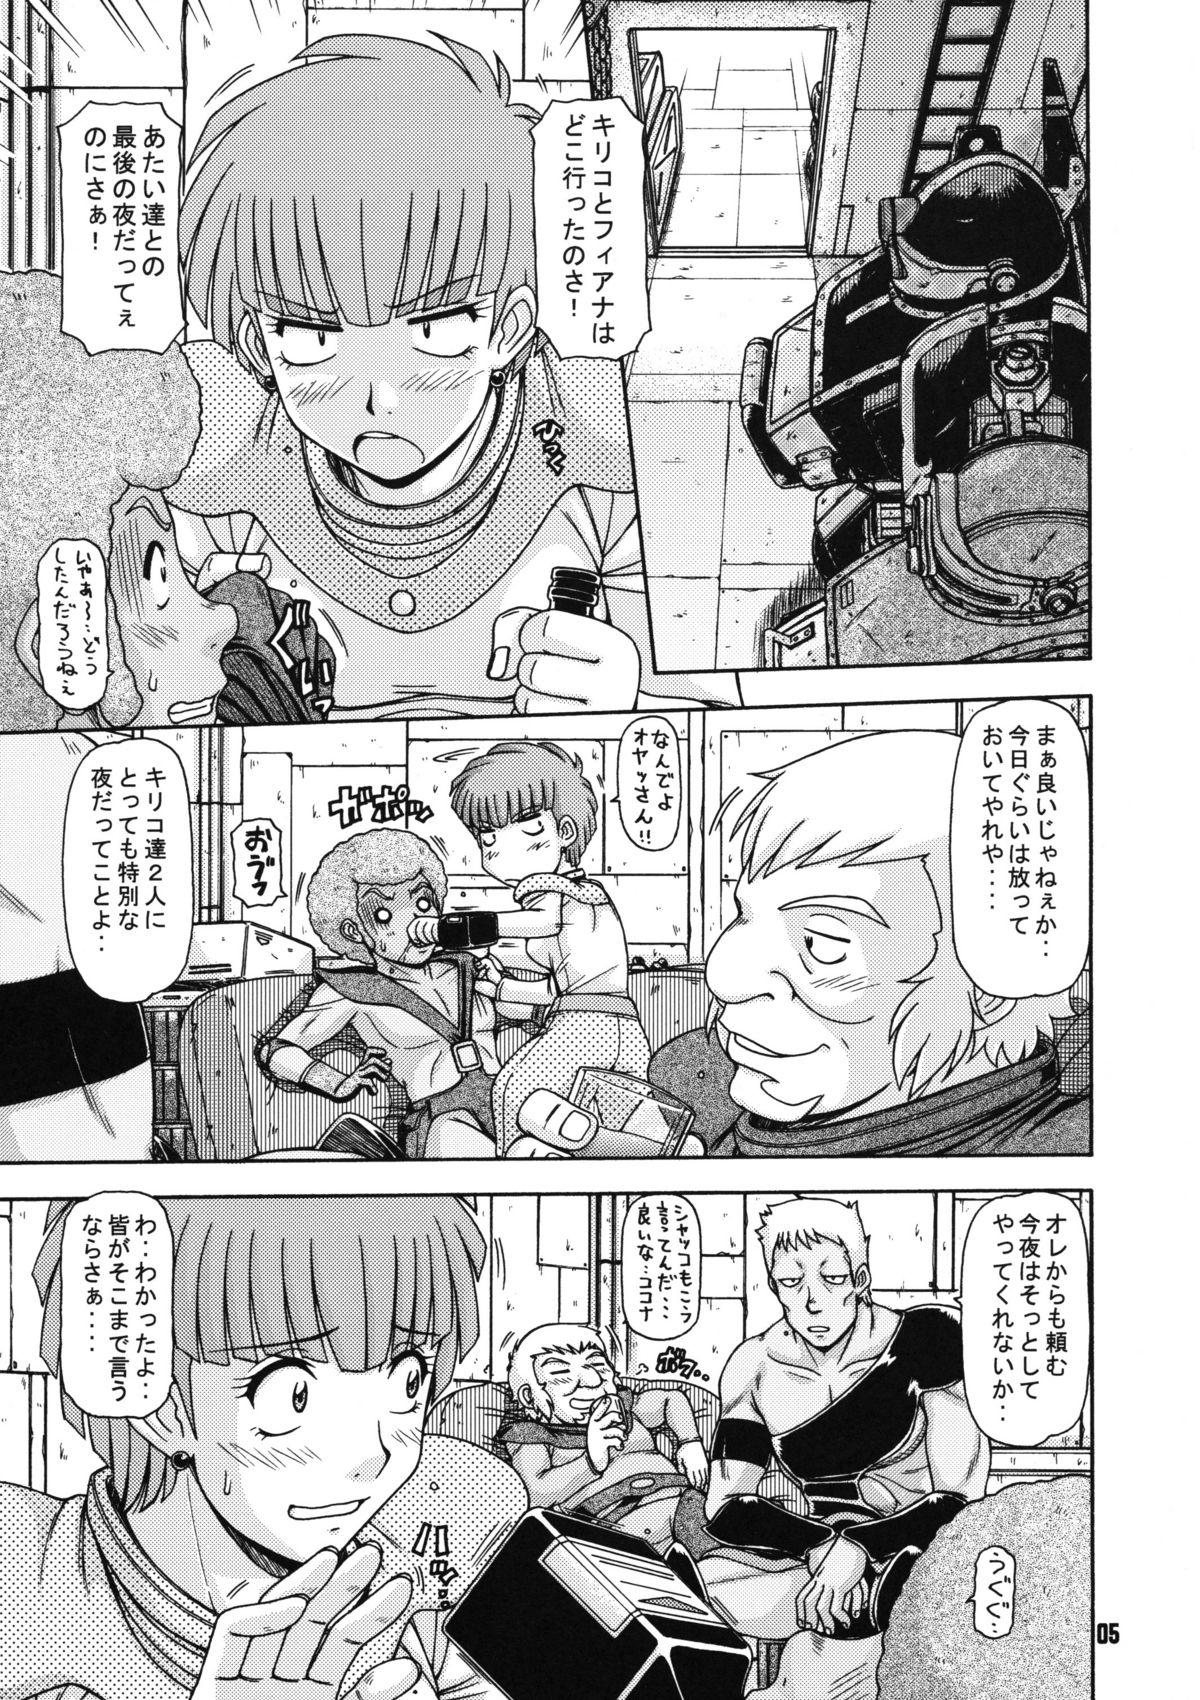 Uncensored RED MUFFLER Vo - Armored trooper votoms Marido - Page 4